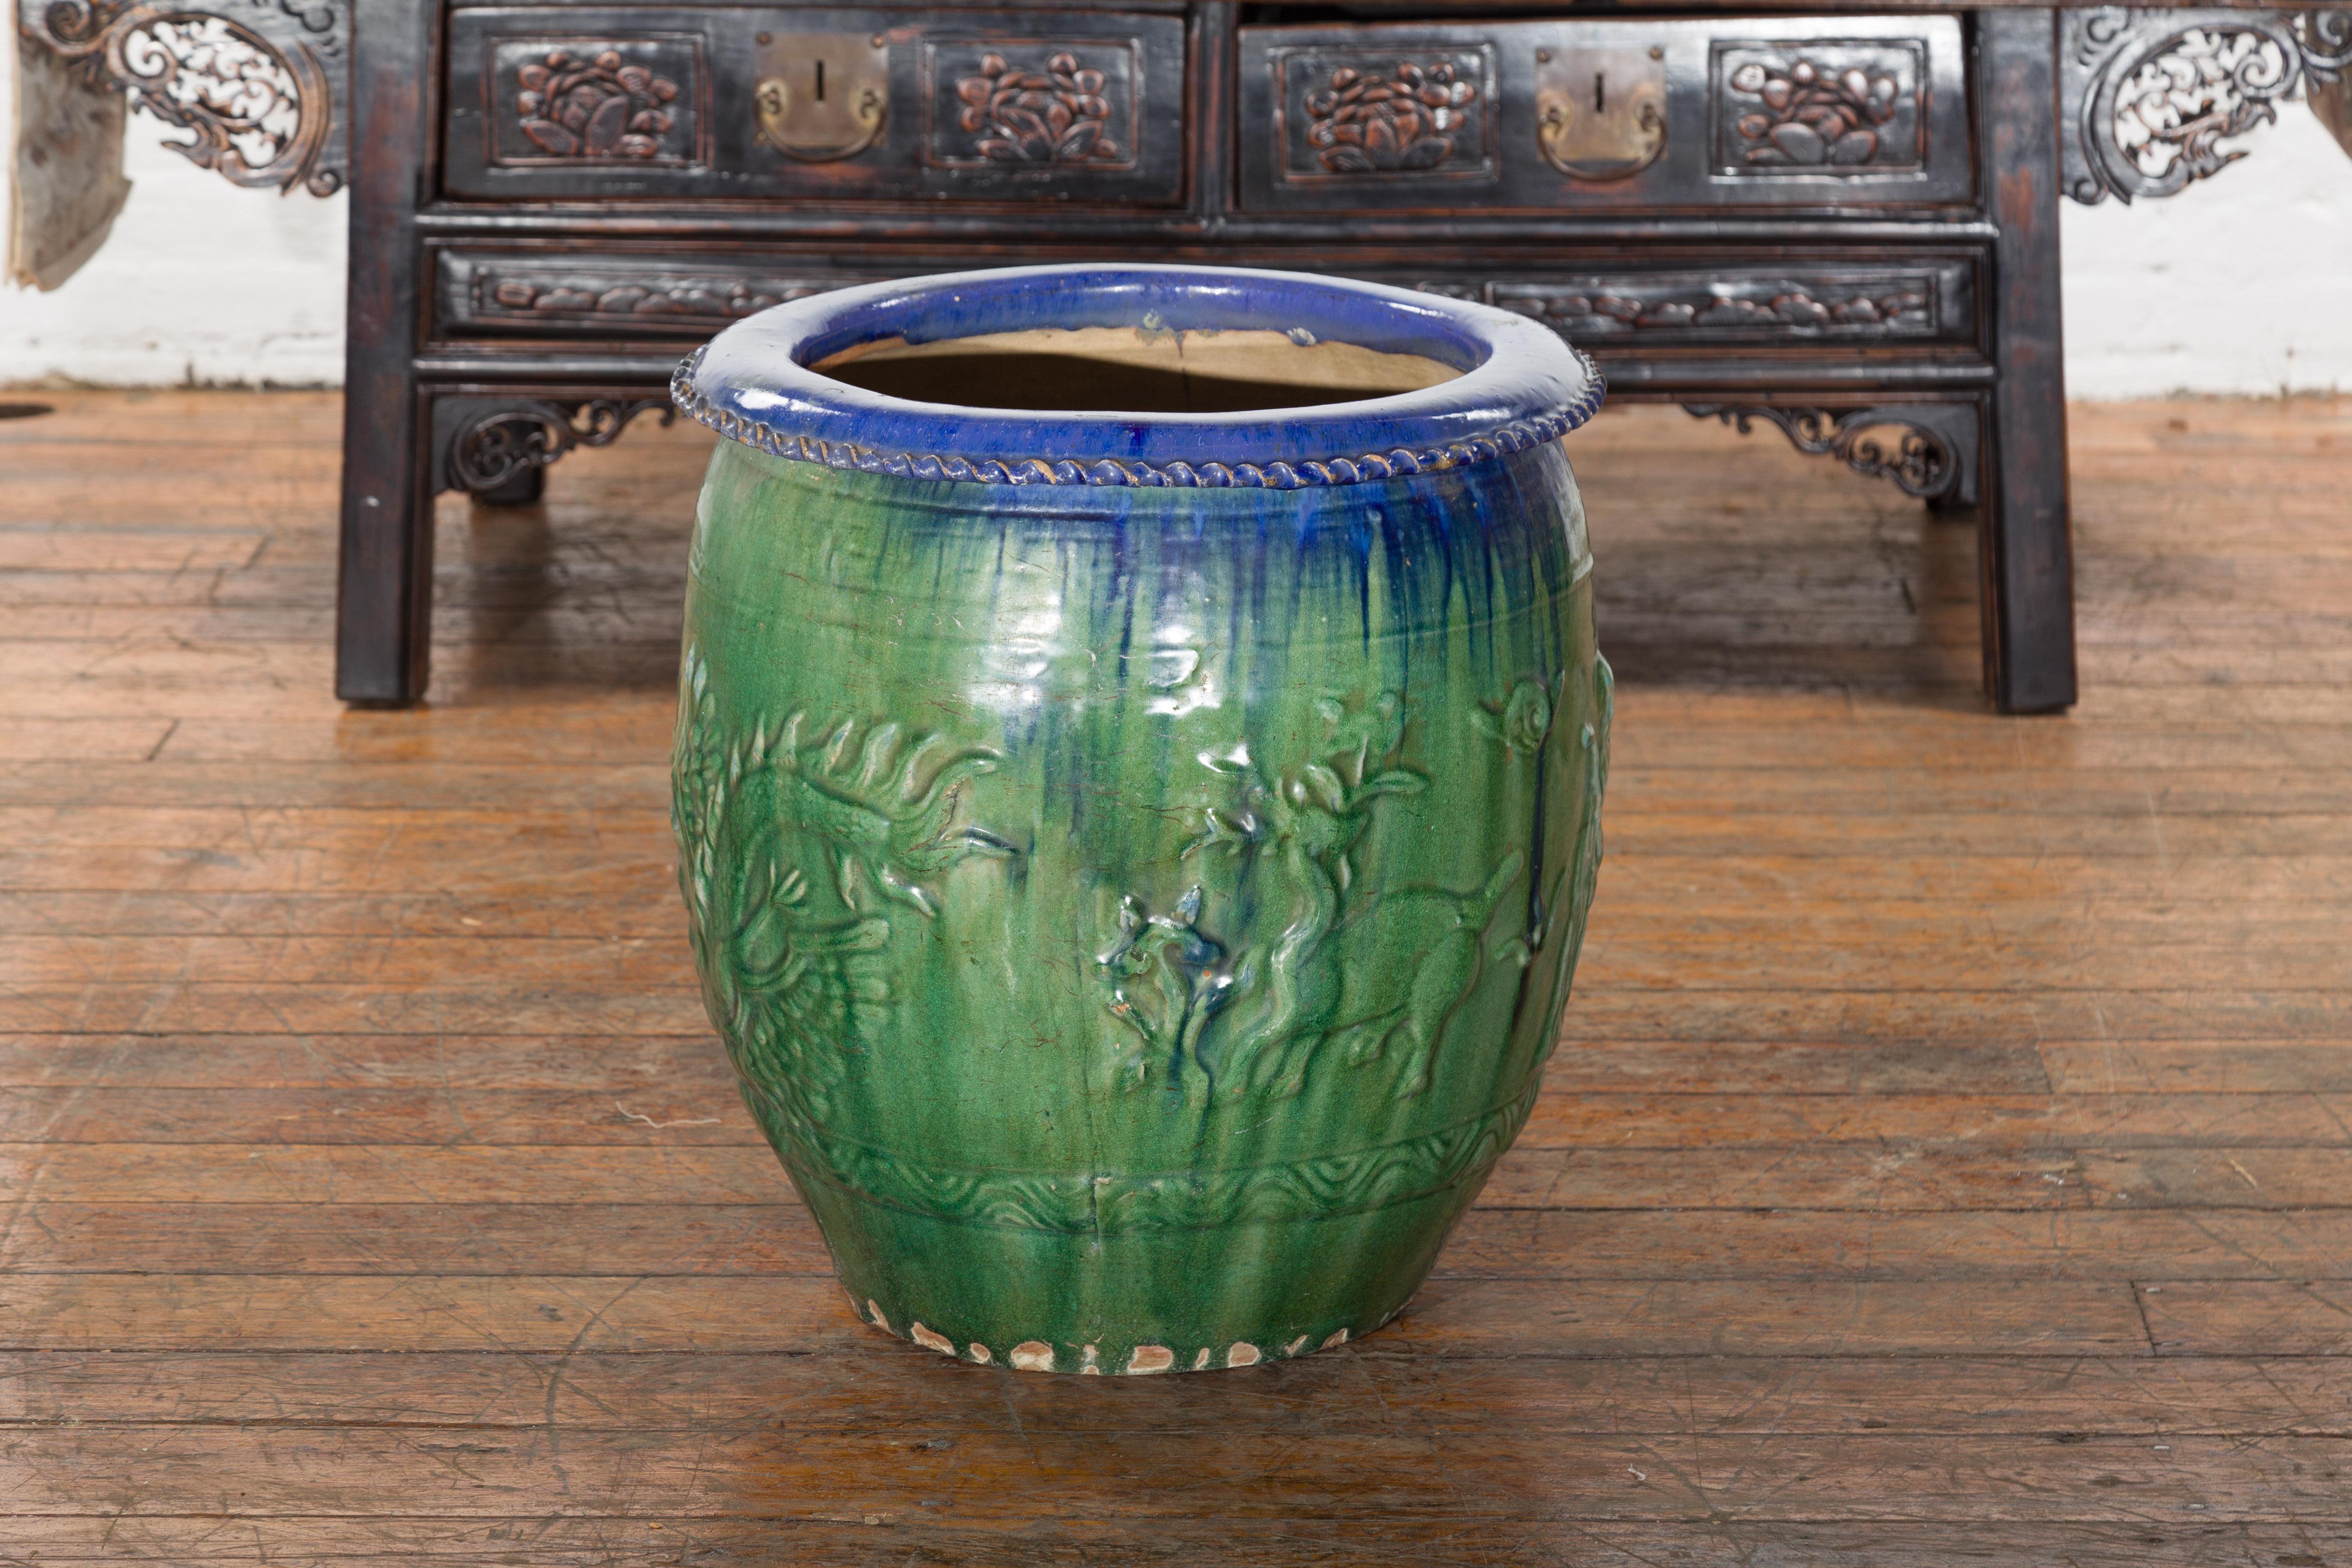 A Chinese vintage blue and green glazed garden planter from the mid 20th century, with raised animal décor. Created in China during the midcentury period, this large garden planter attracts our attention with its green and blue glazed body. Adorned